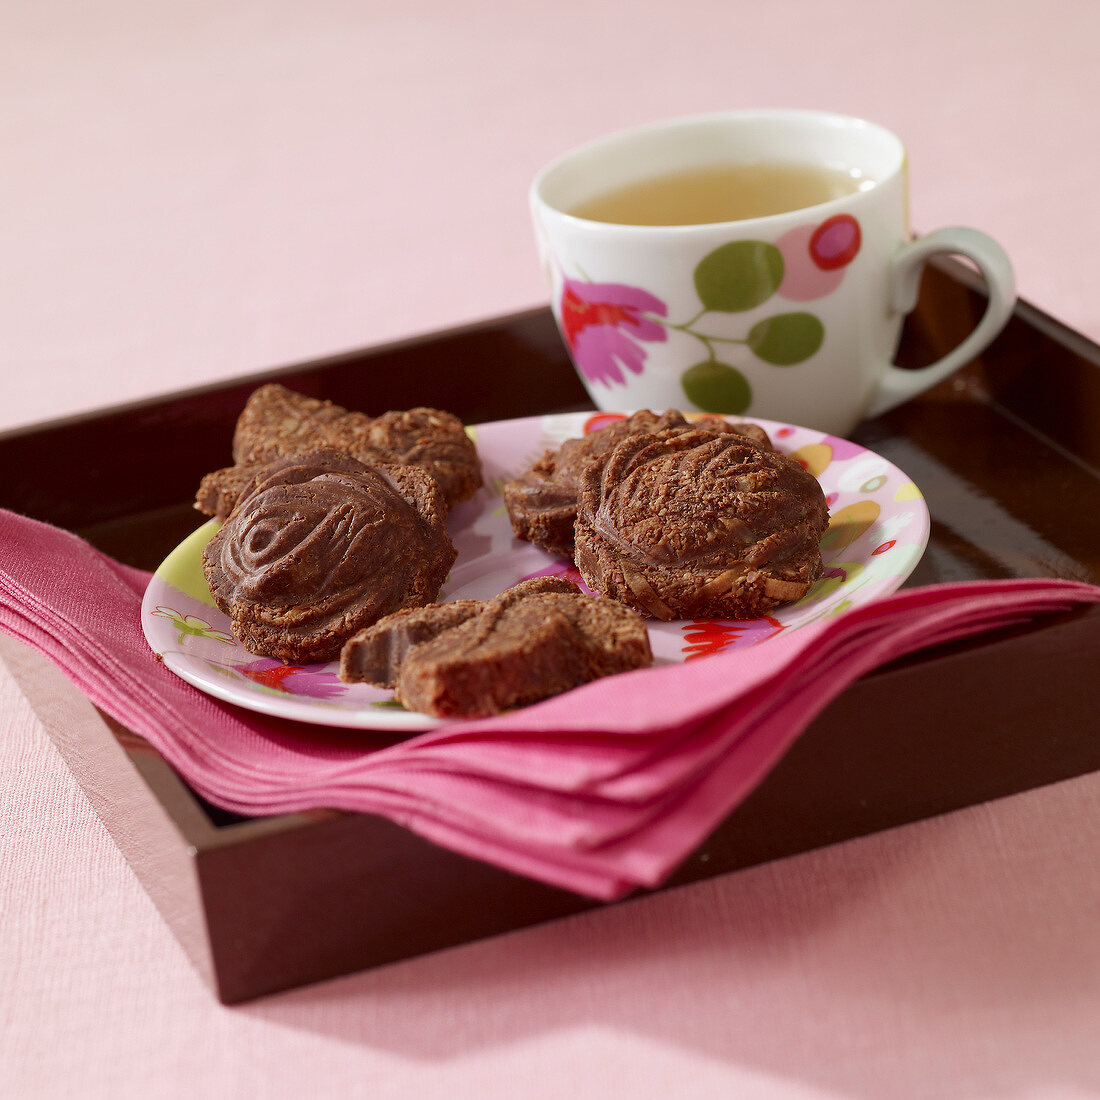 Small chocolate cakes and a cup of tea